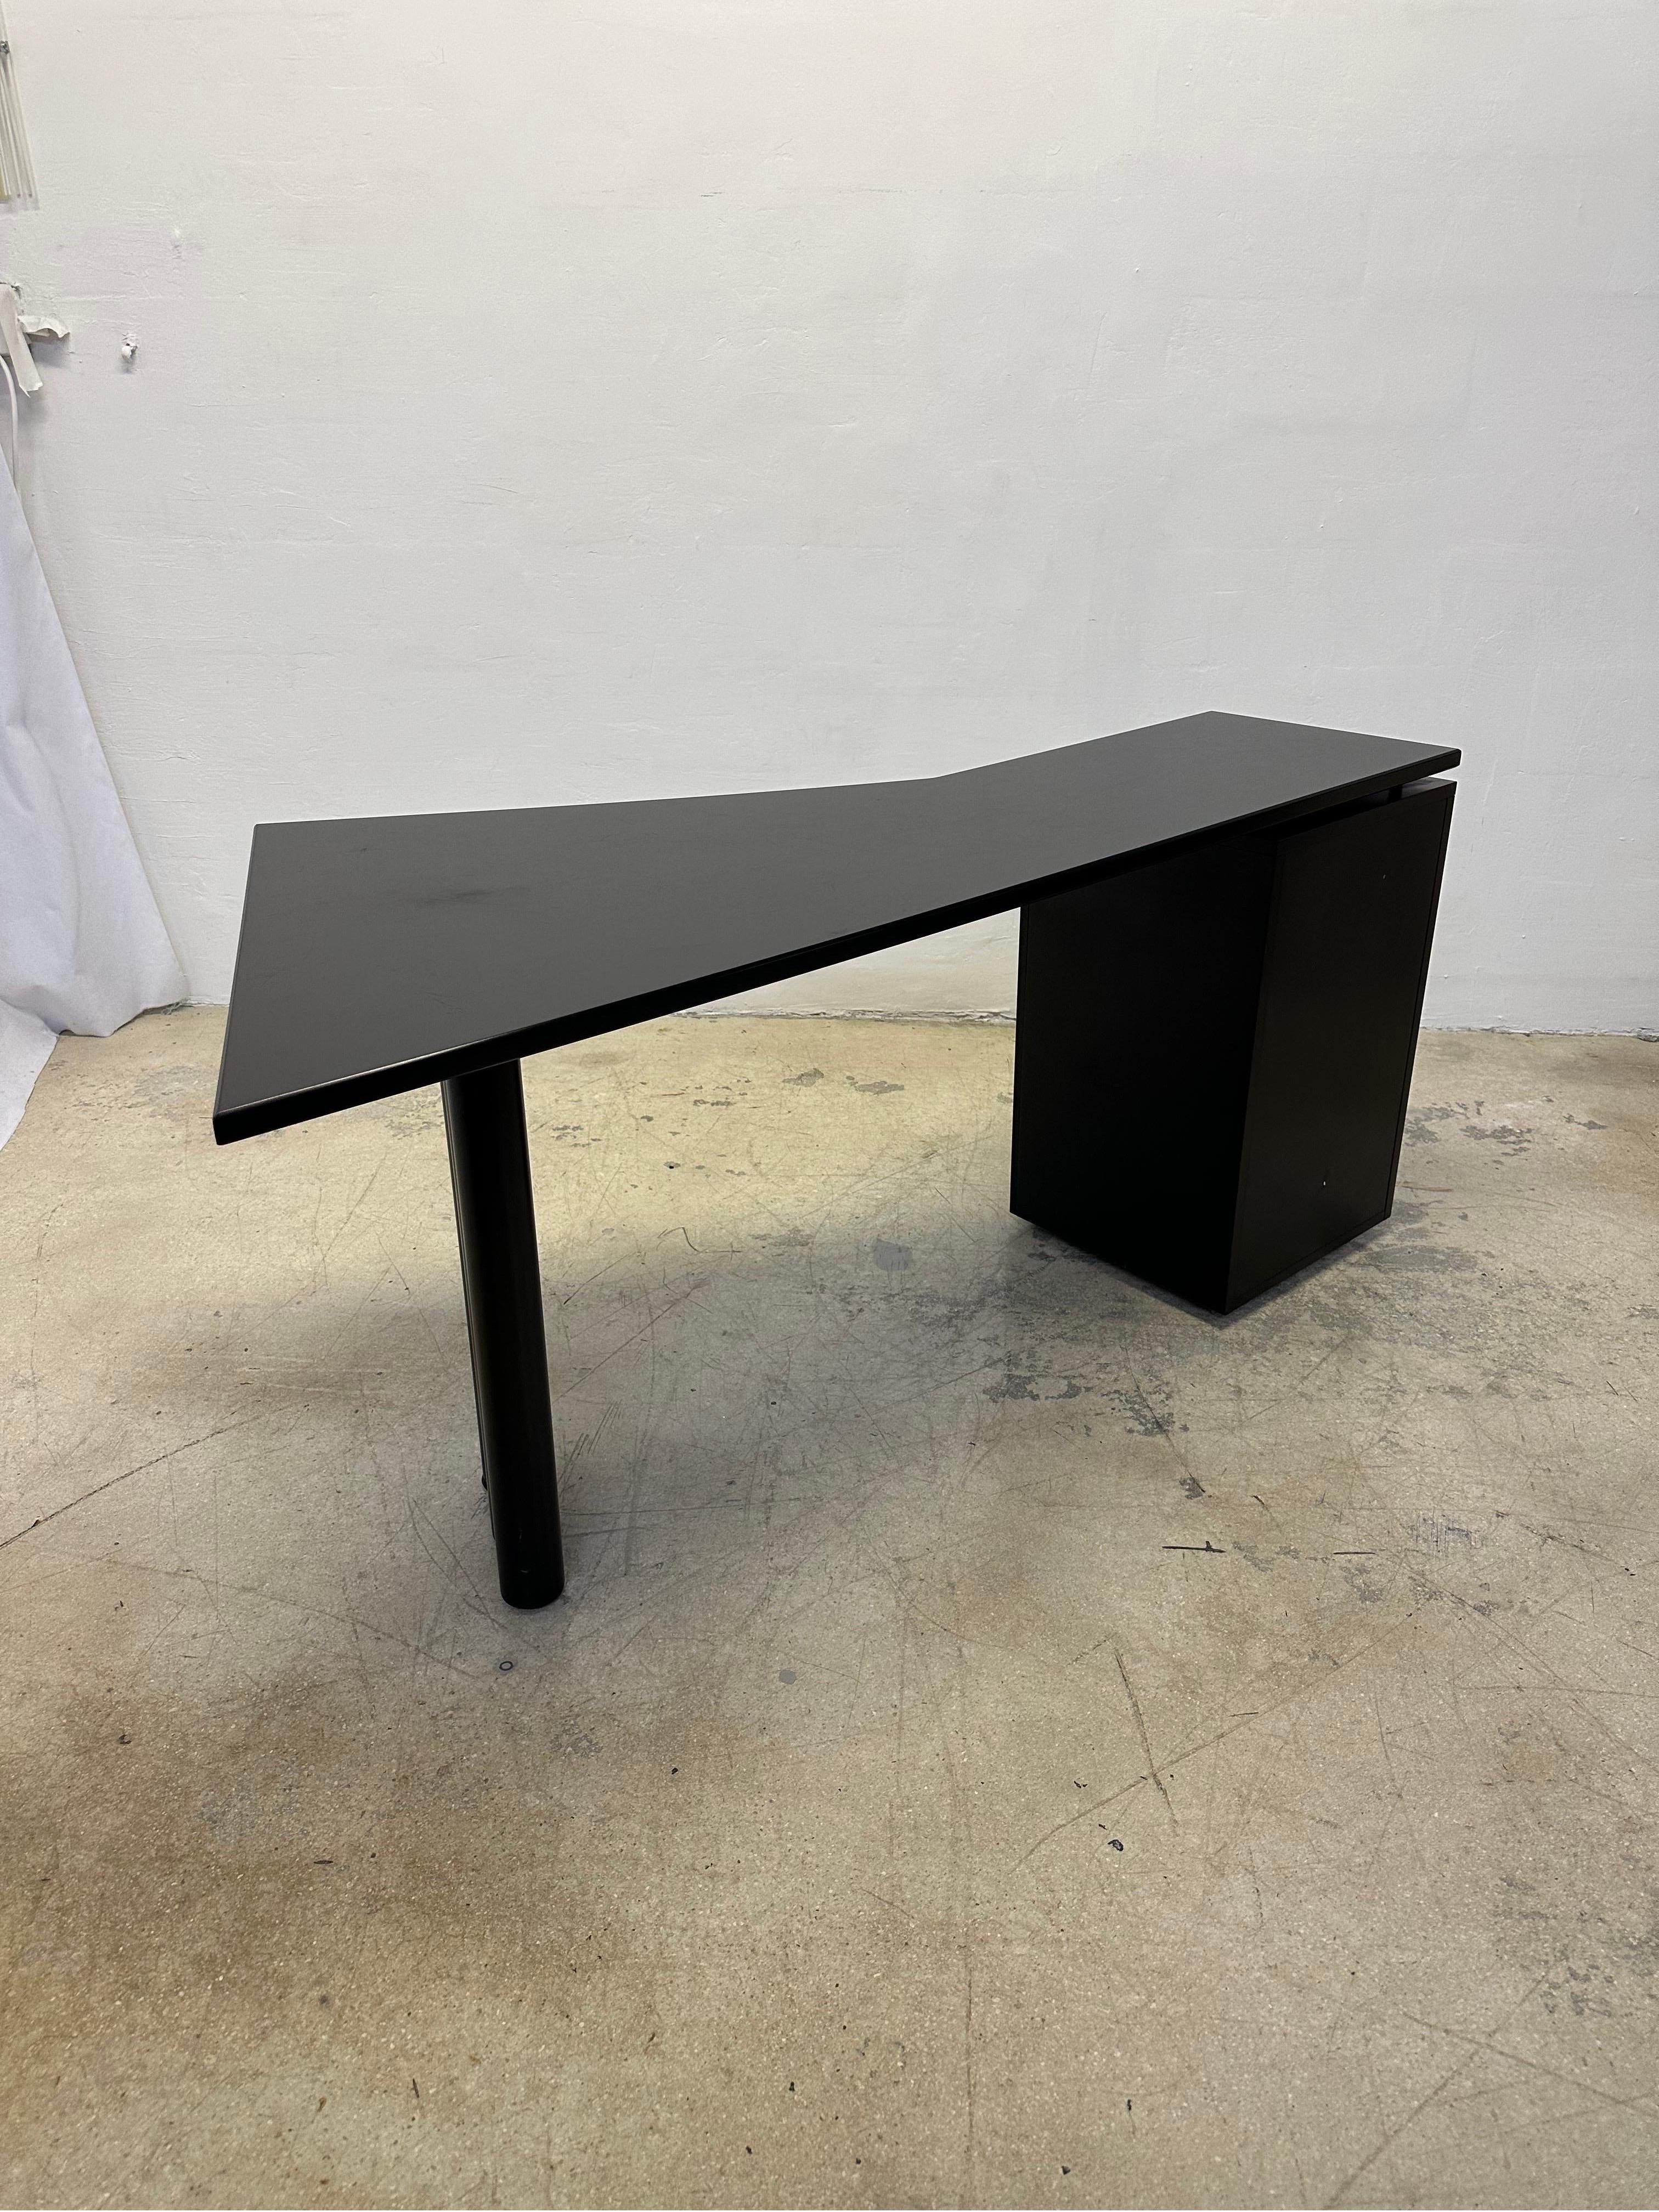 Postmodern Black Lacquered Desk by Interlubke, Germany 1980s For Sale 4